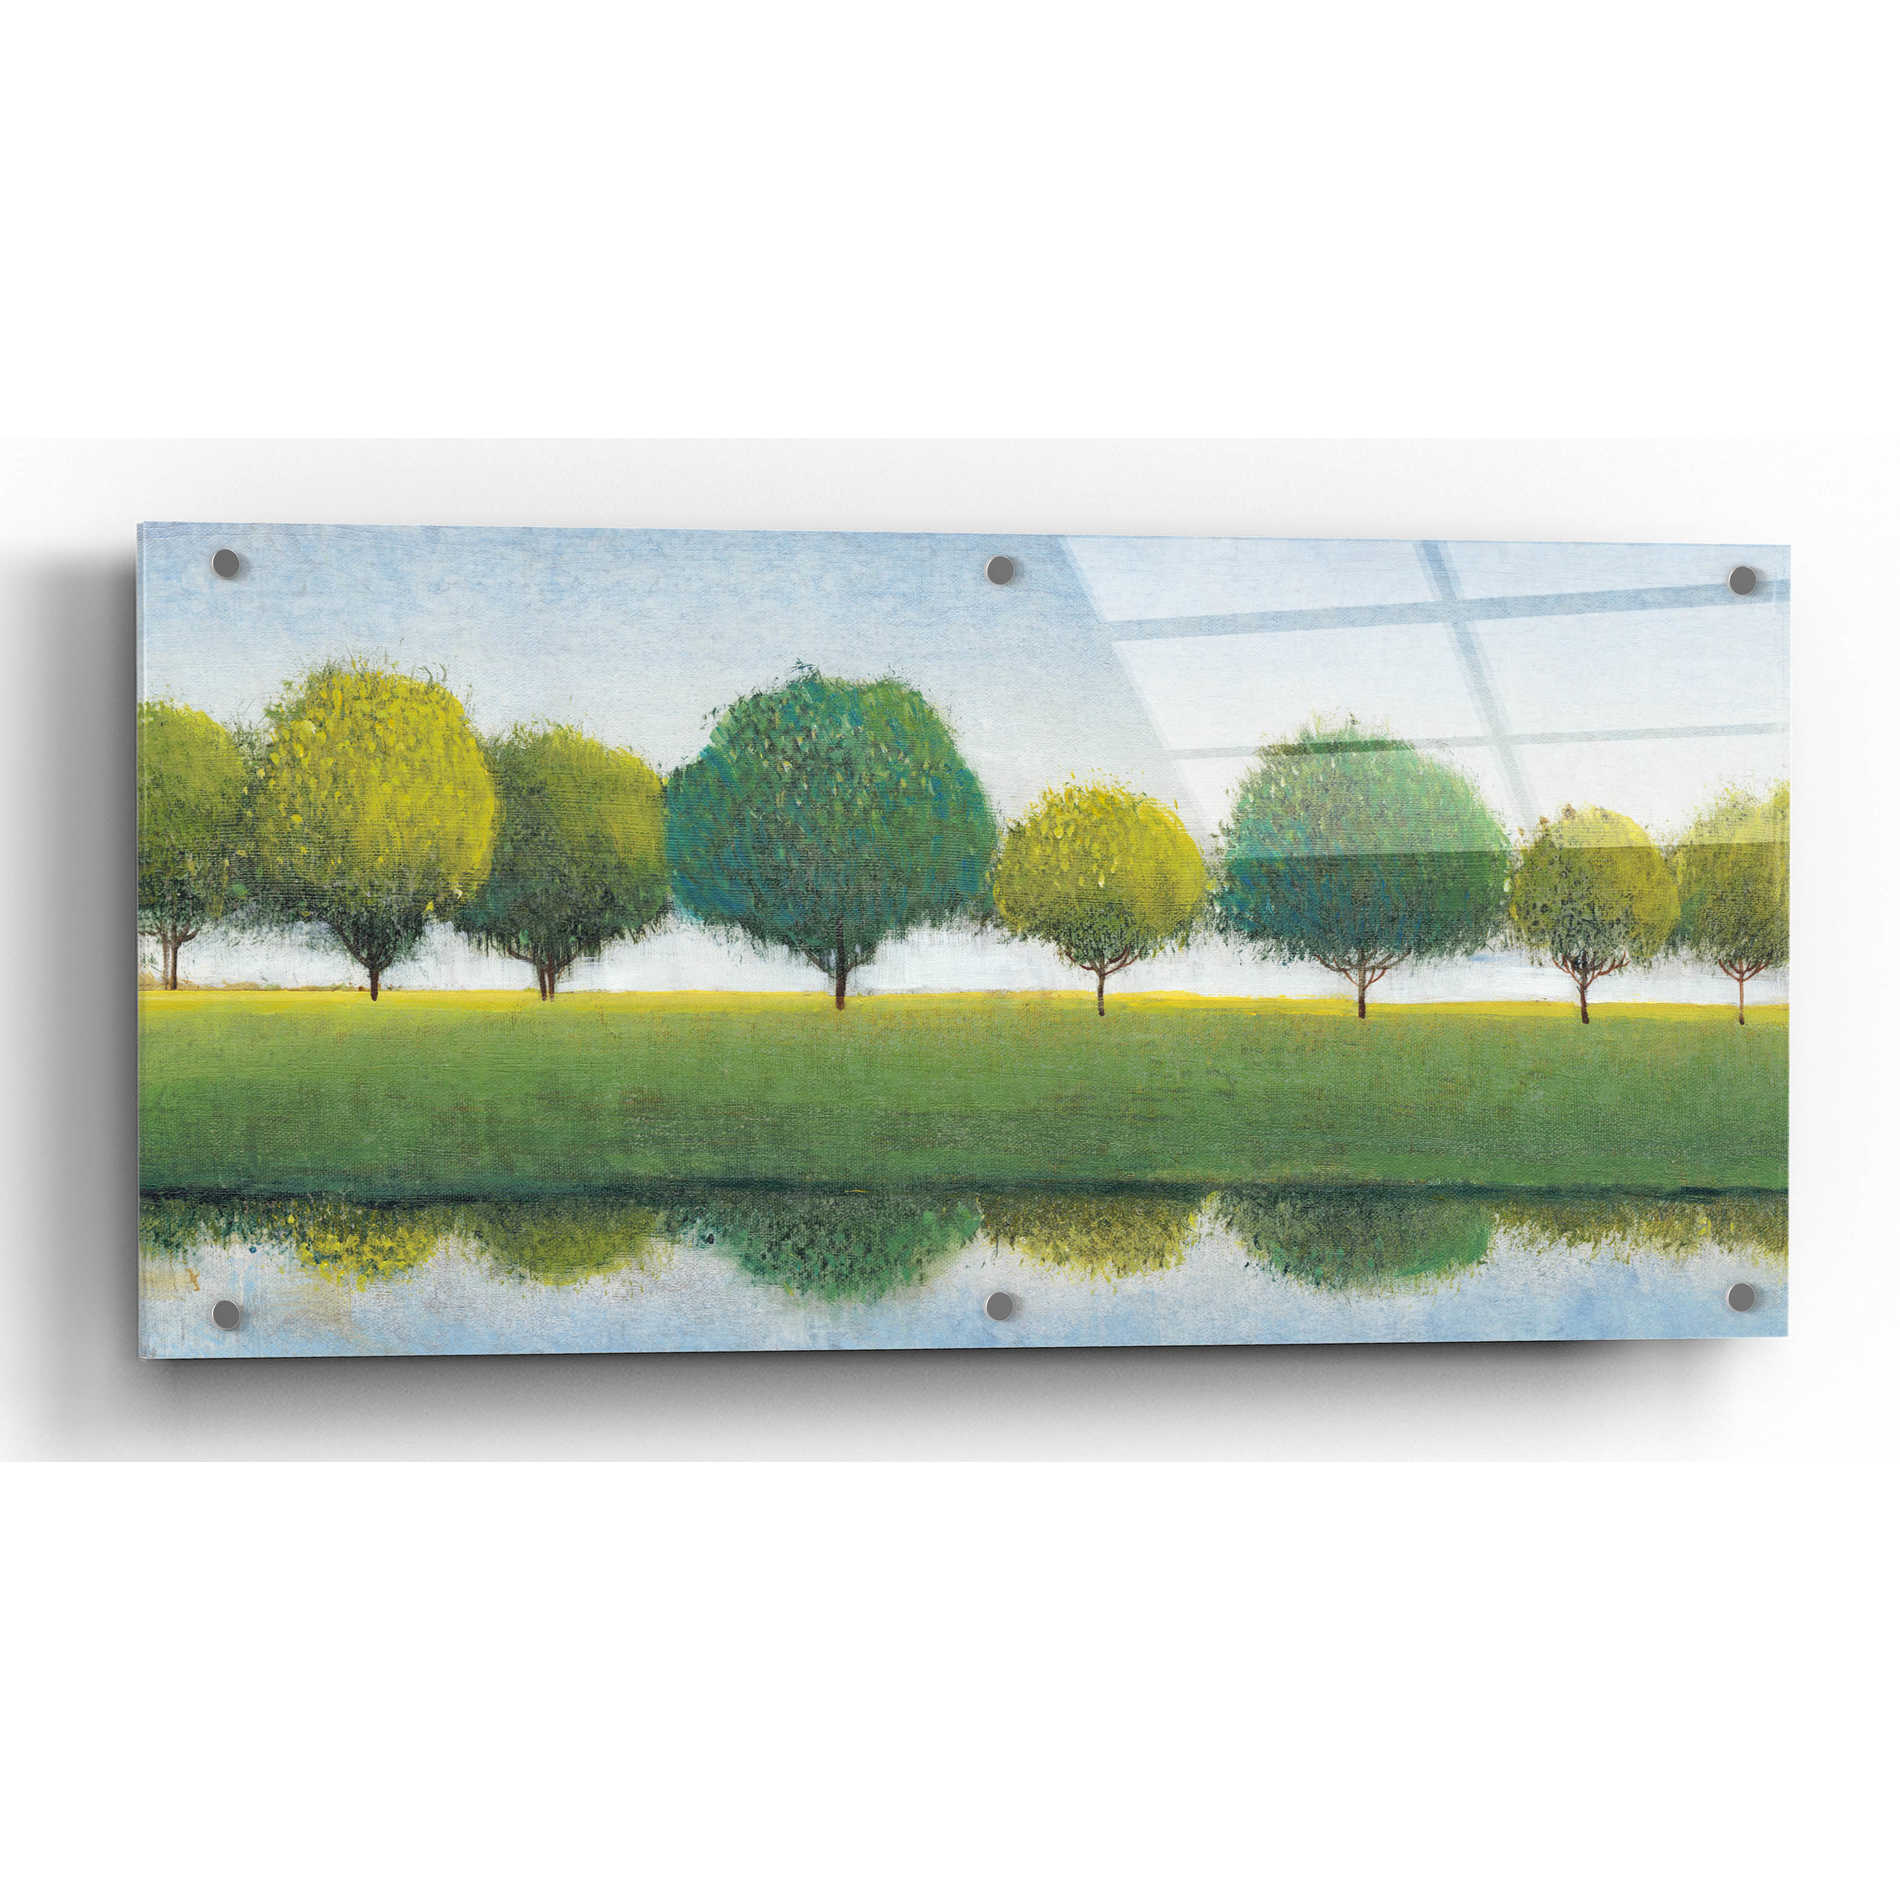 Epic Art 'Trees in a Line I' by Tim O'Toole, Acrylic Glass Wall Art,24x12